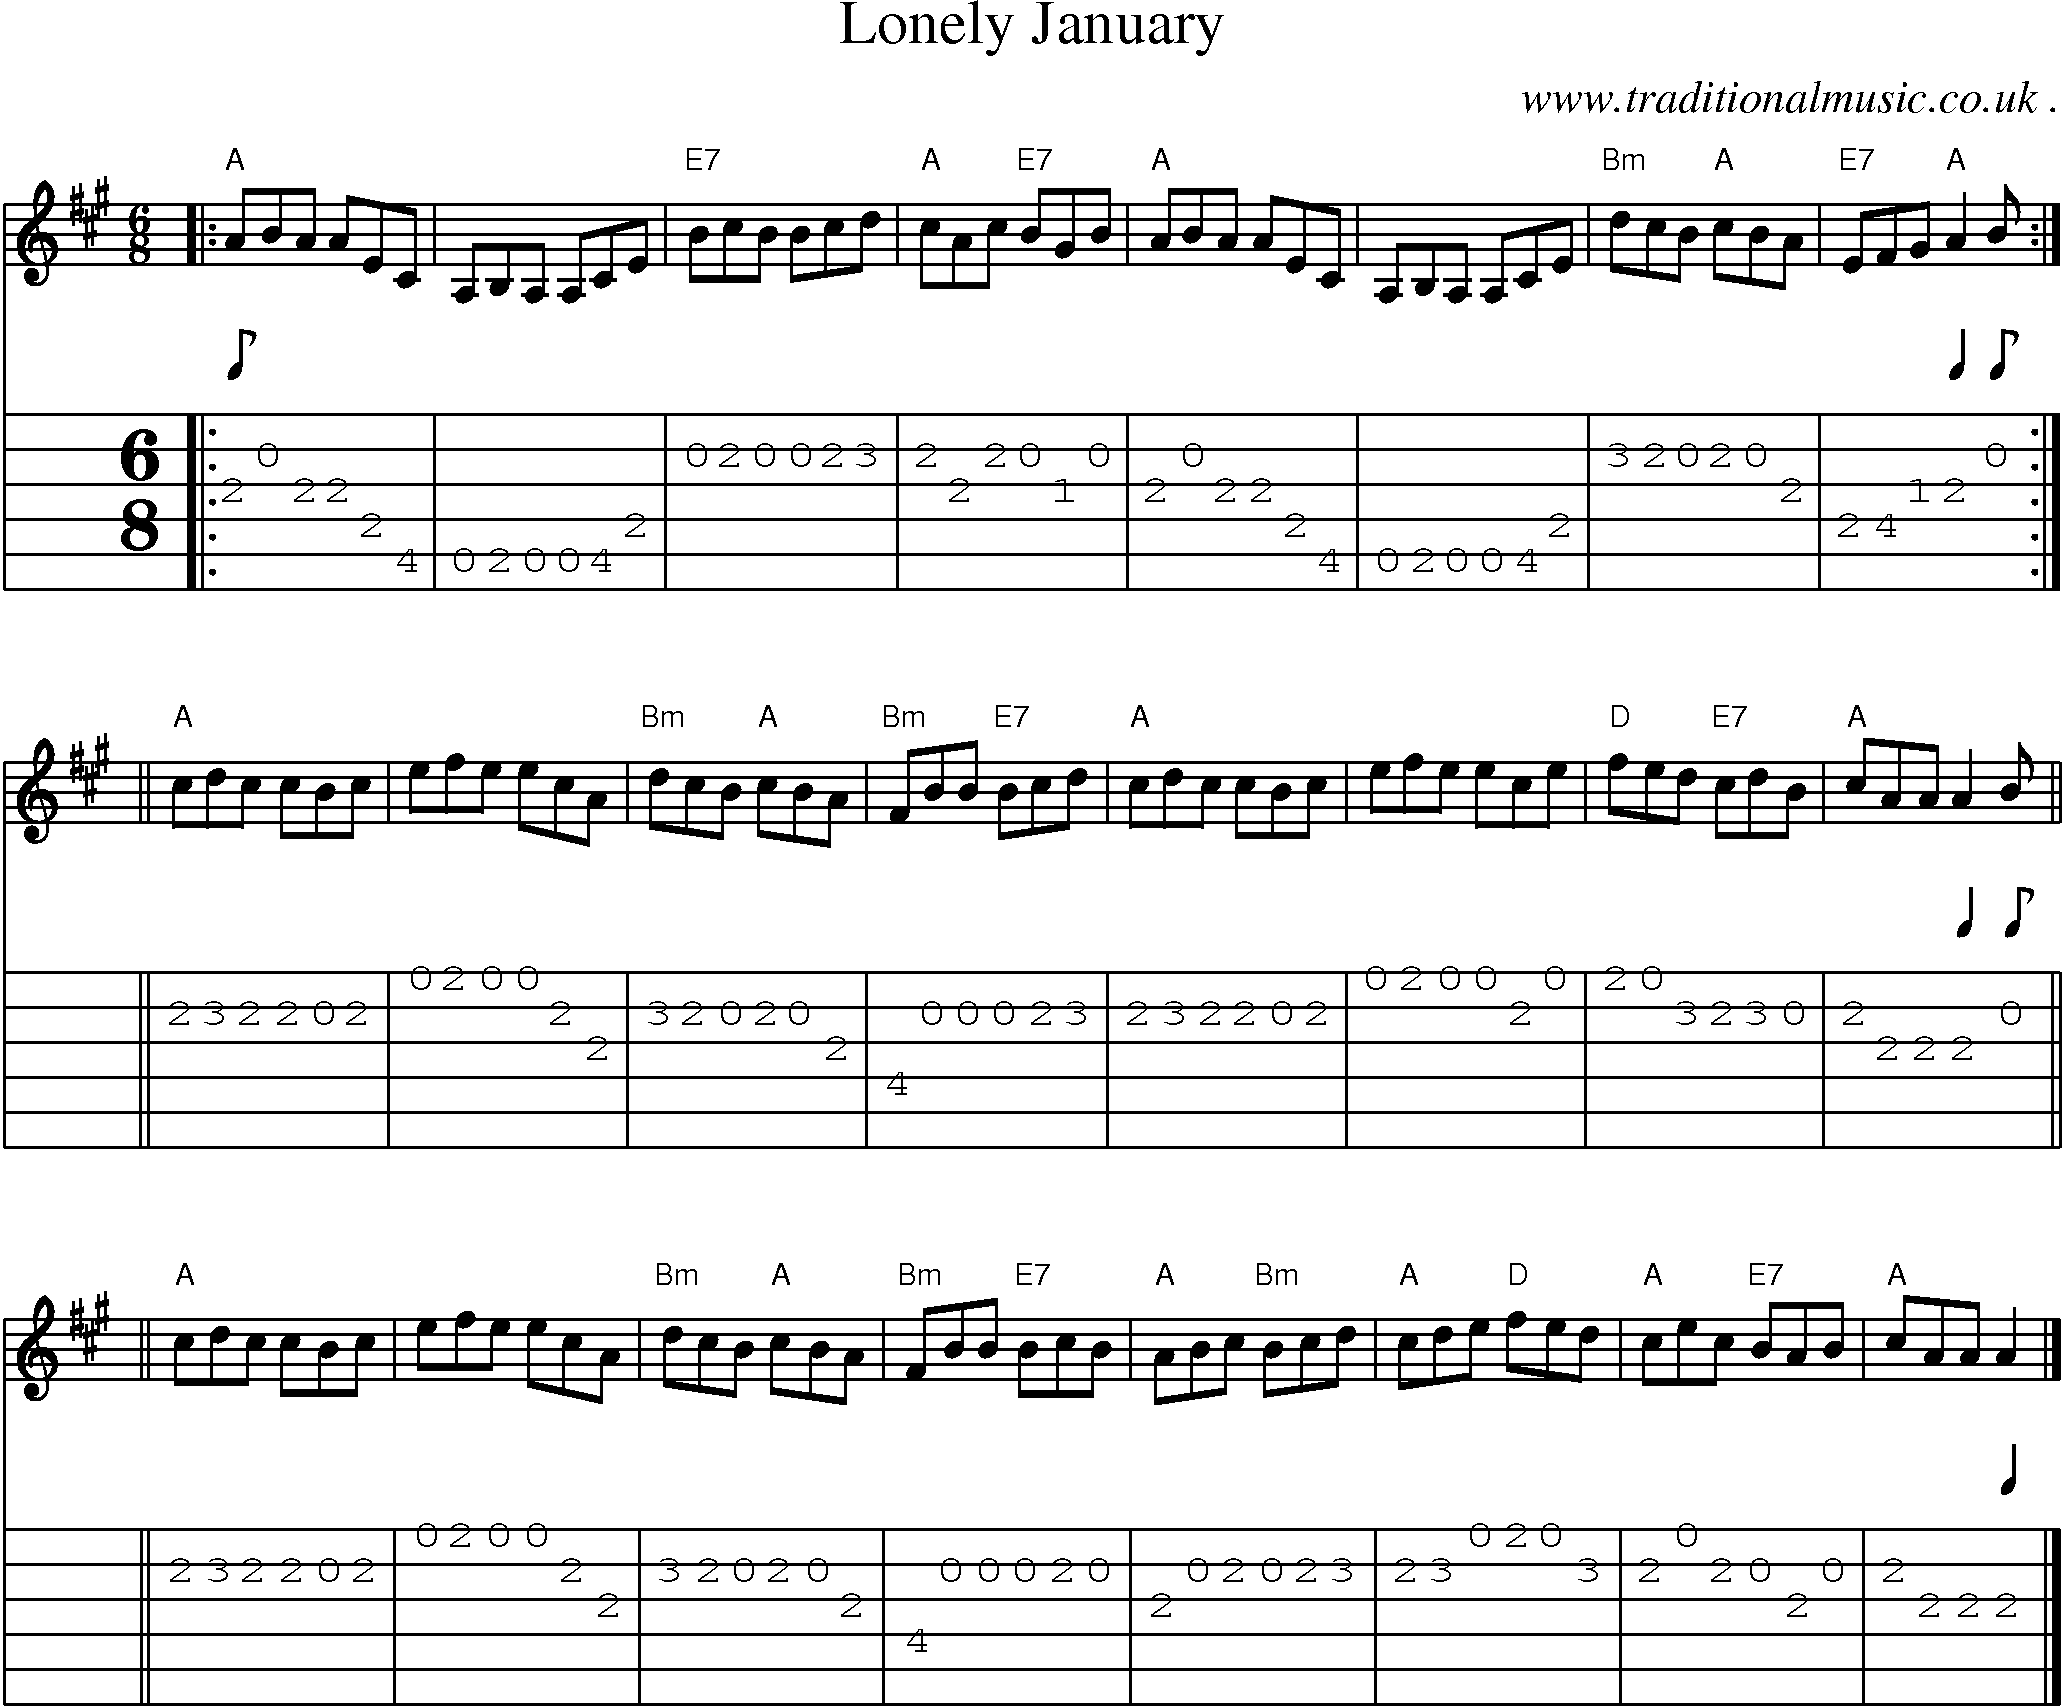 Sheet-music  score, Chords and Guitar Tabs for Lonely January